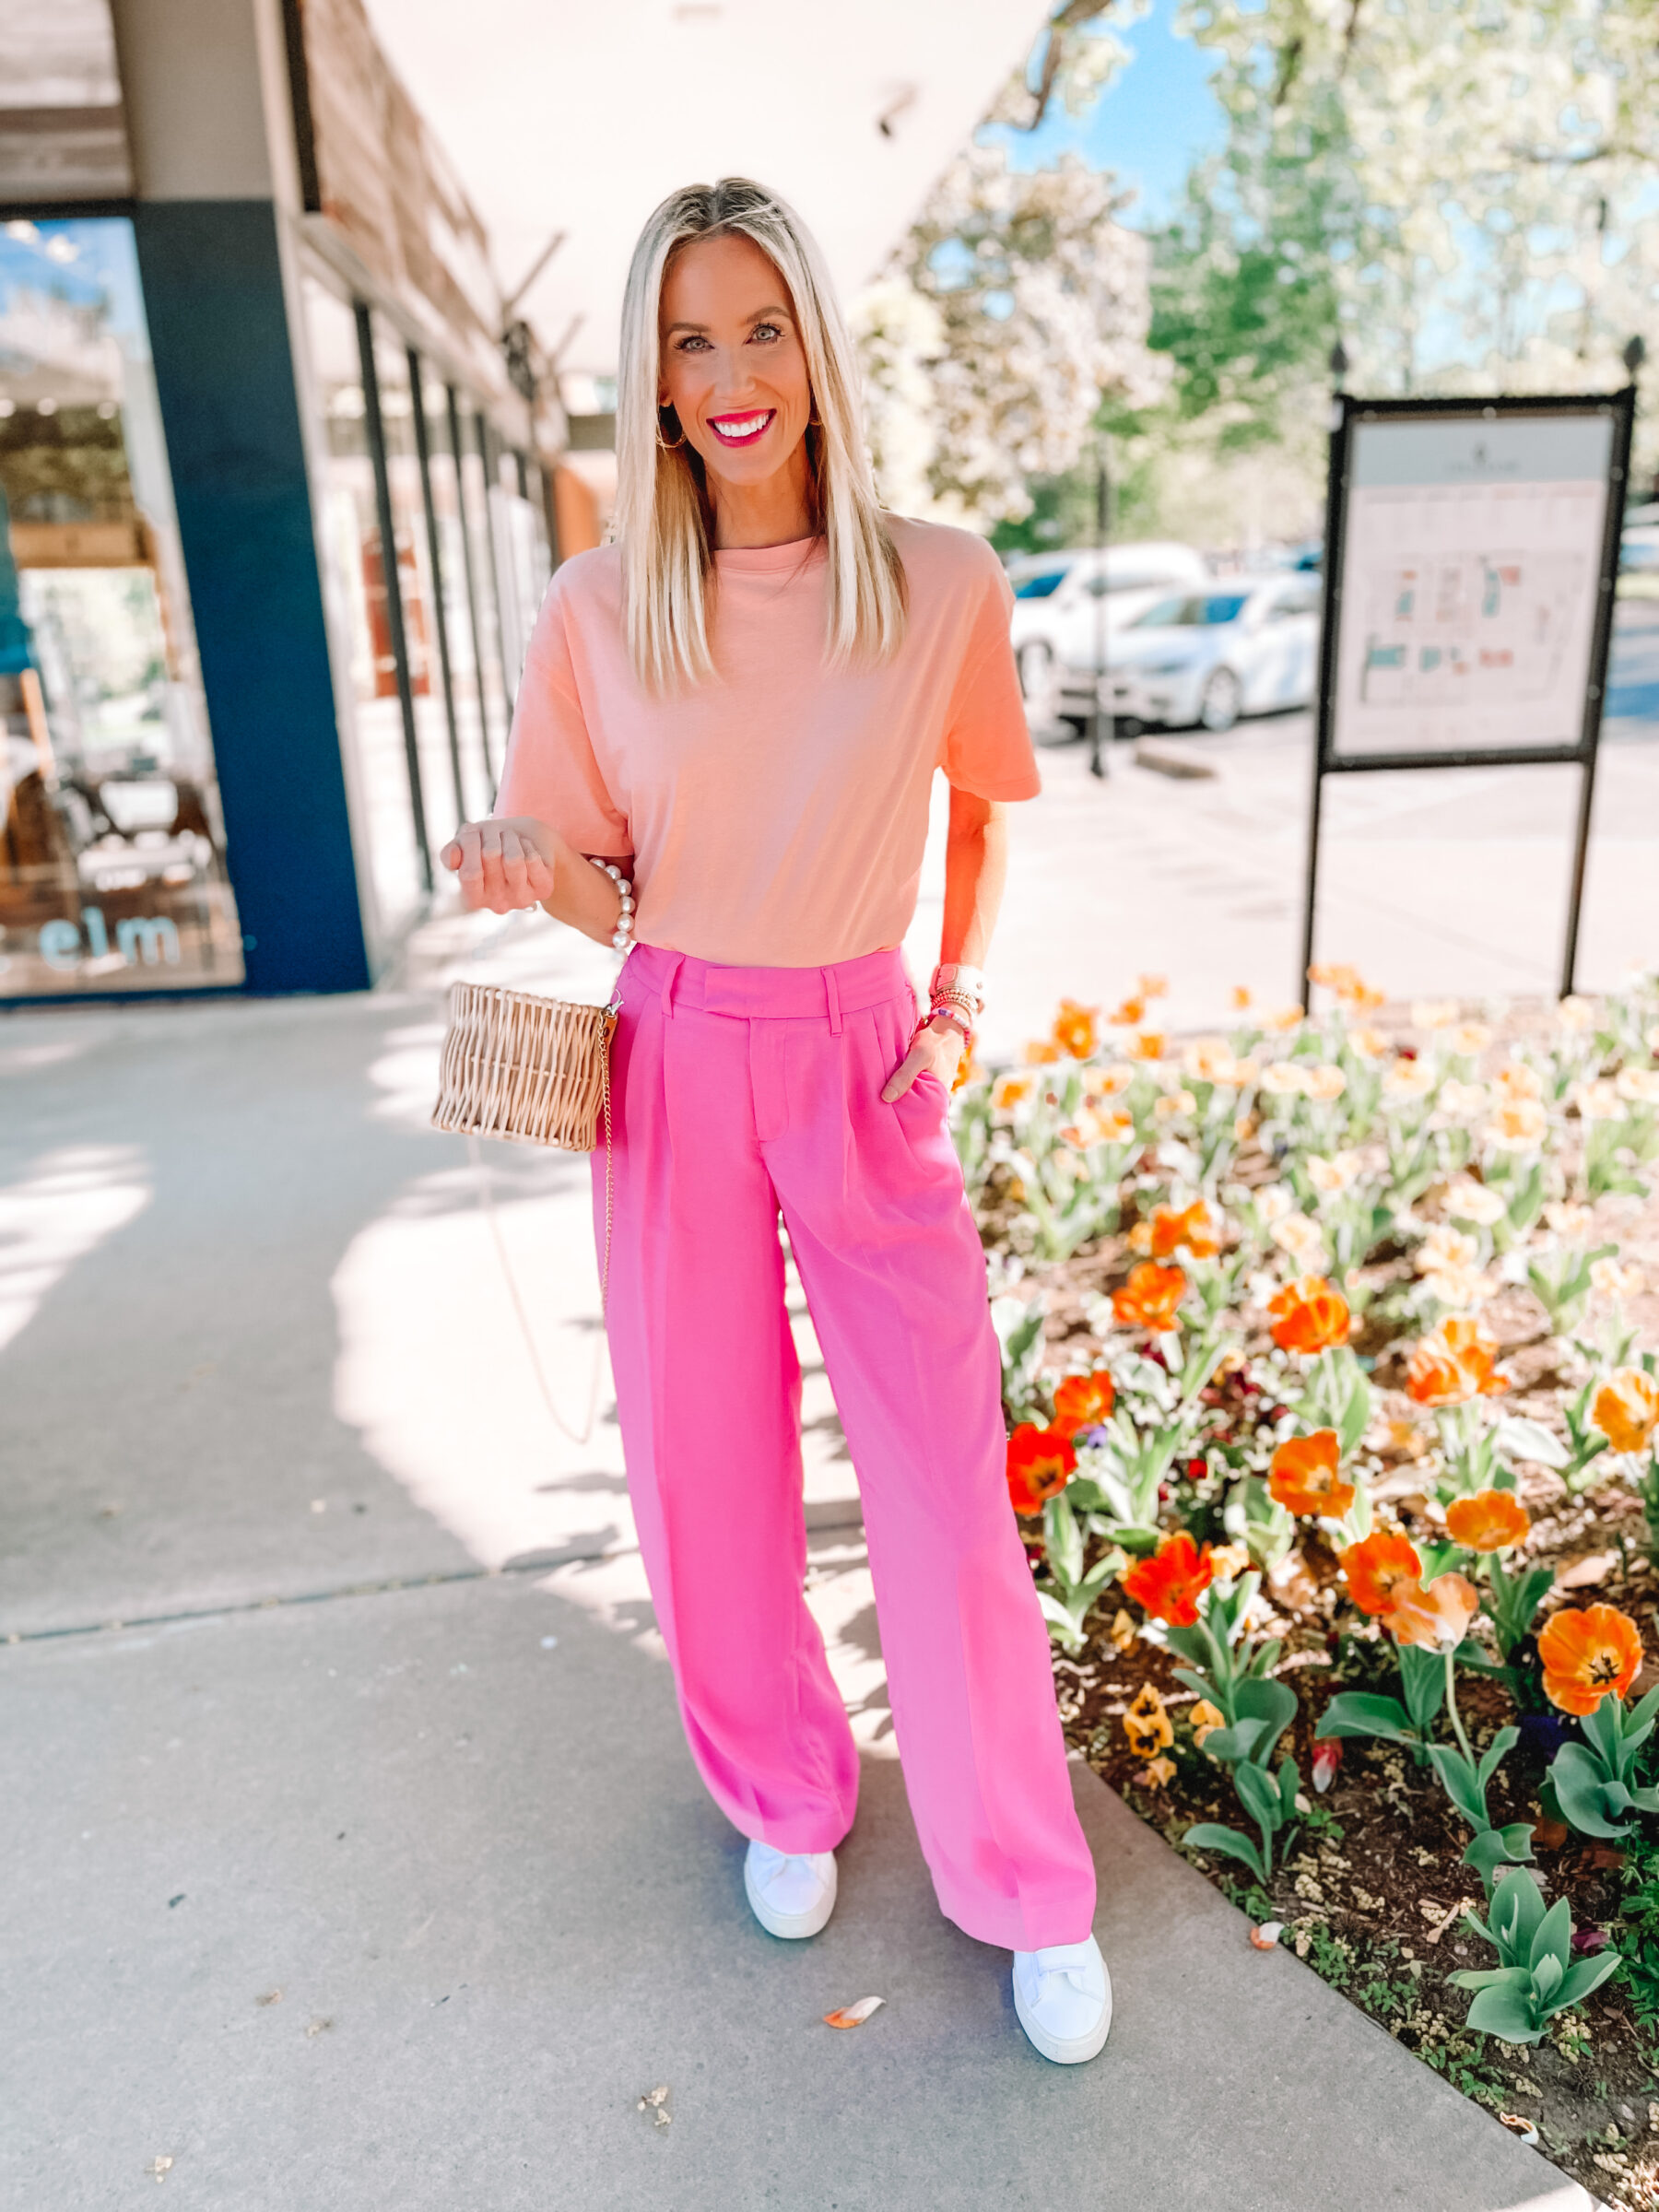 Spring Outfit: combining wide leg pants and white sweater